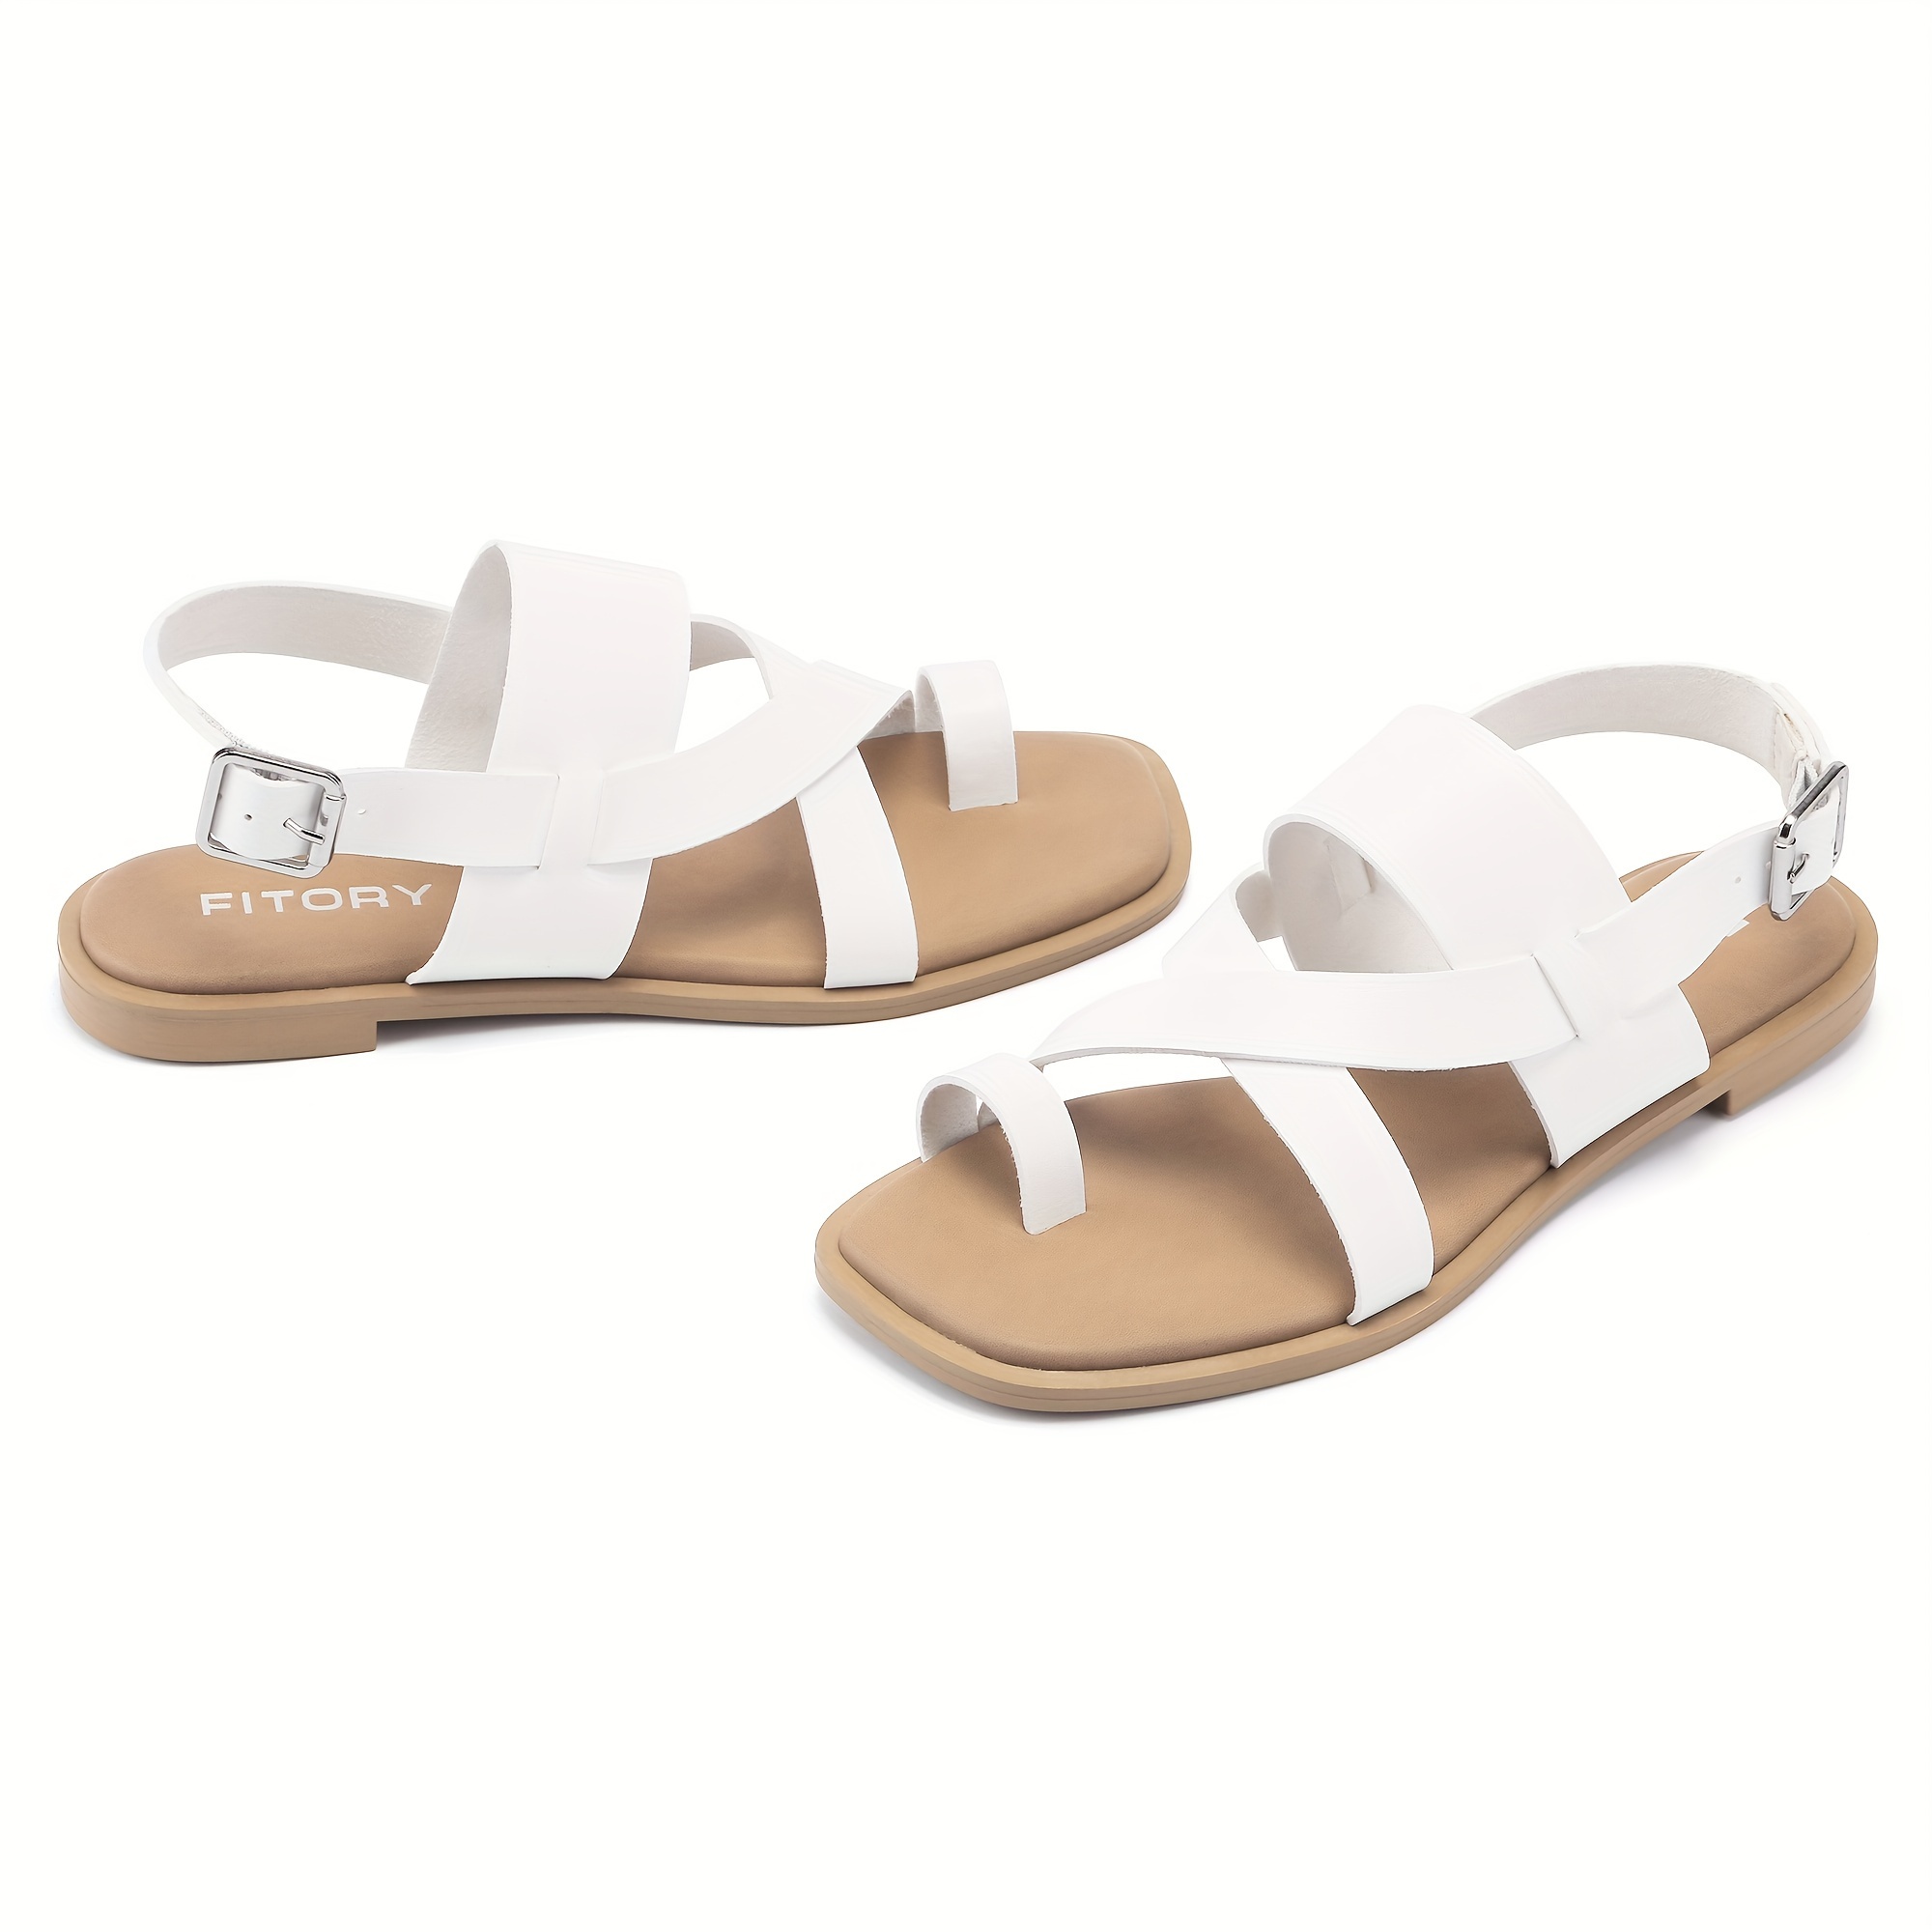 

Women's Flat Adjustable Strap Sandals, Casual Fashion Toe Loop Buckle Strap Shoes, Square Open Toe Summer Sandals